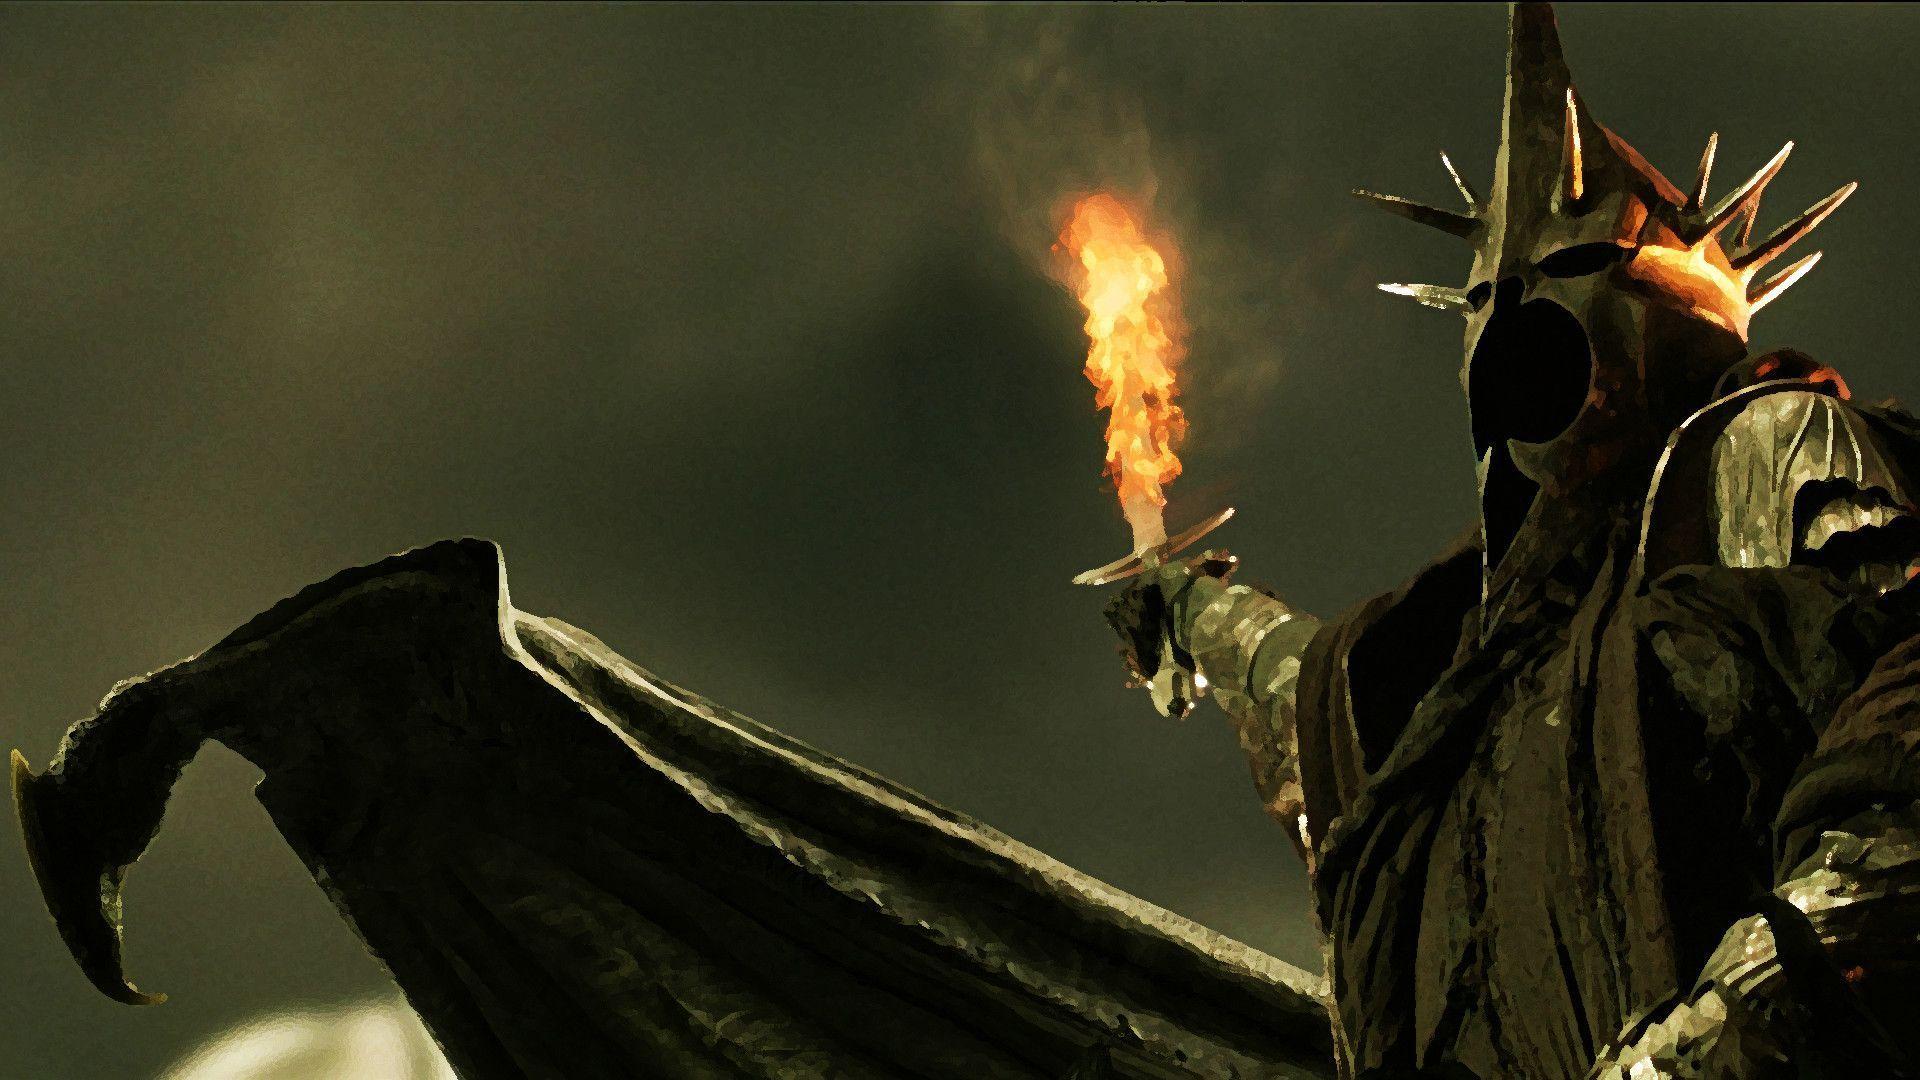 The Lord of the Rings HD Wallpaper 1920x1080